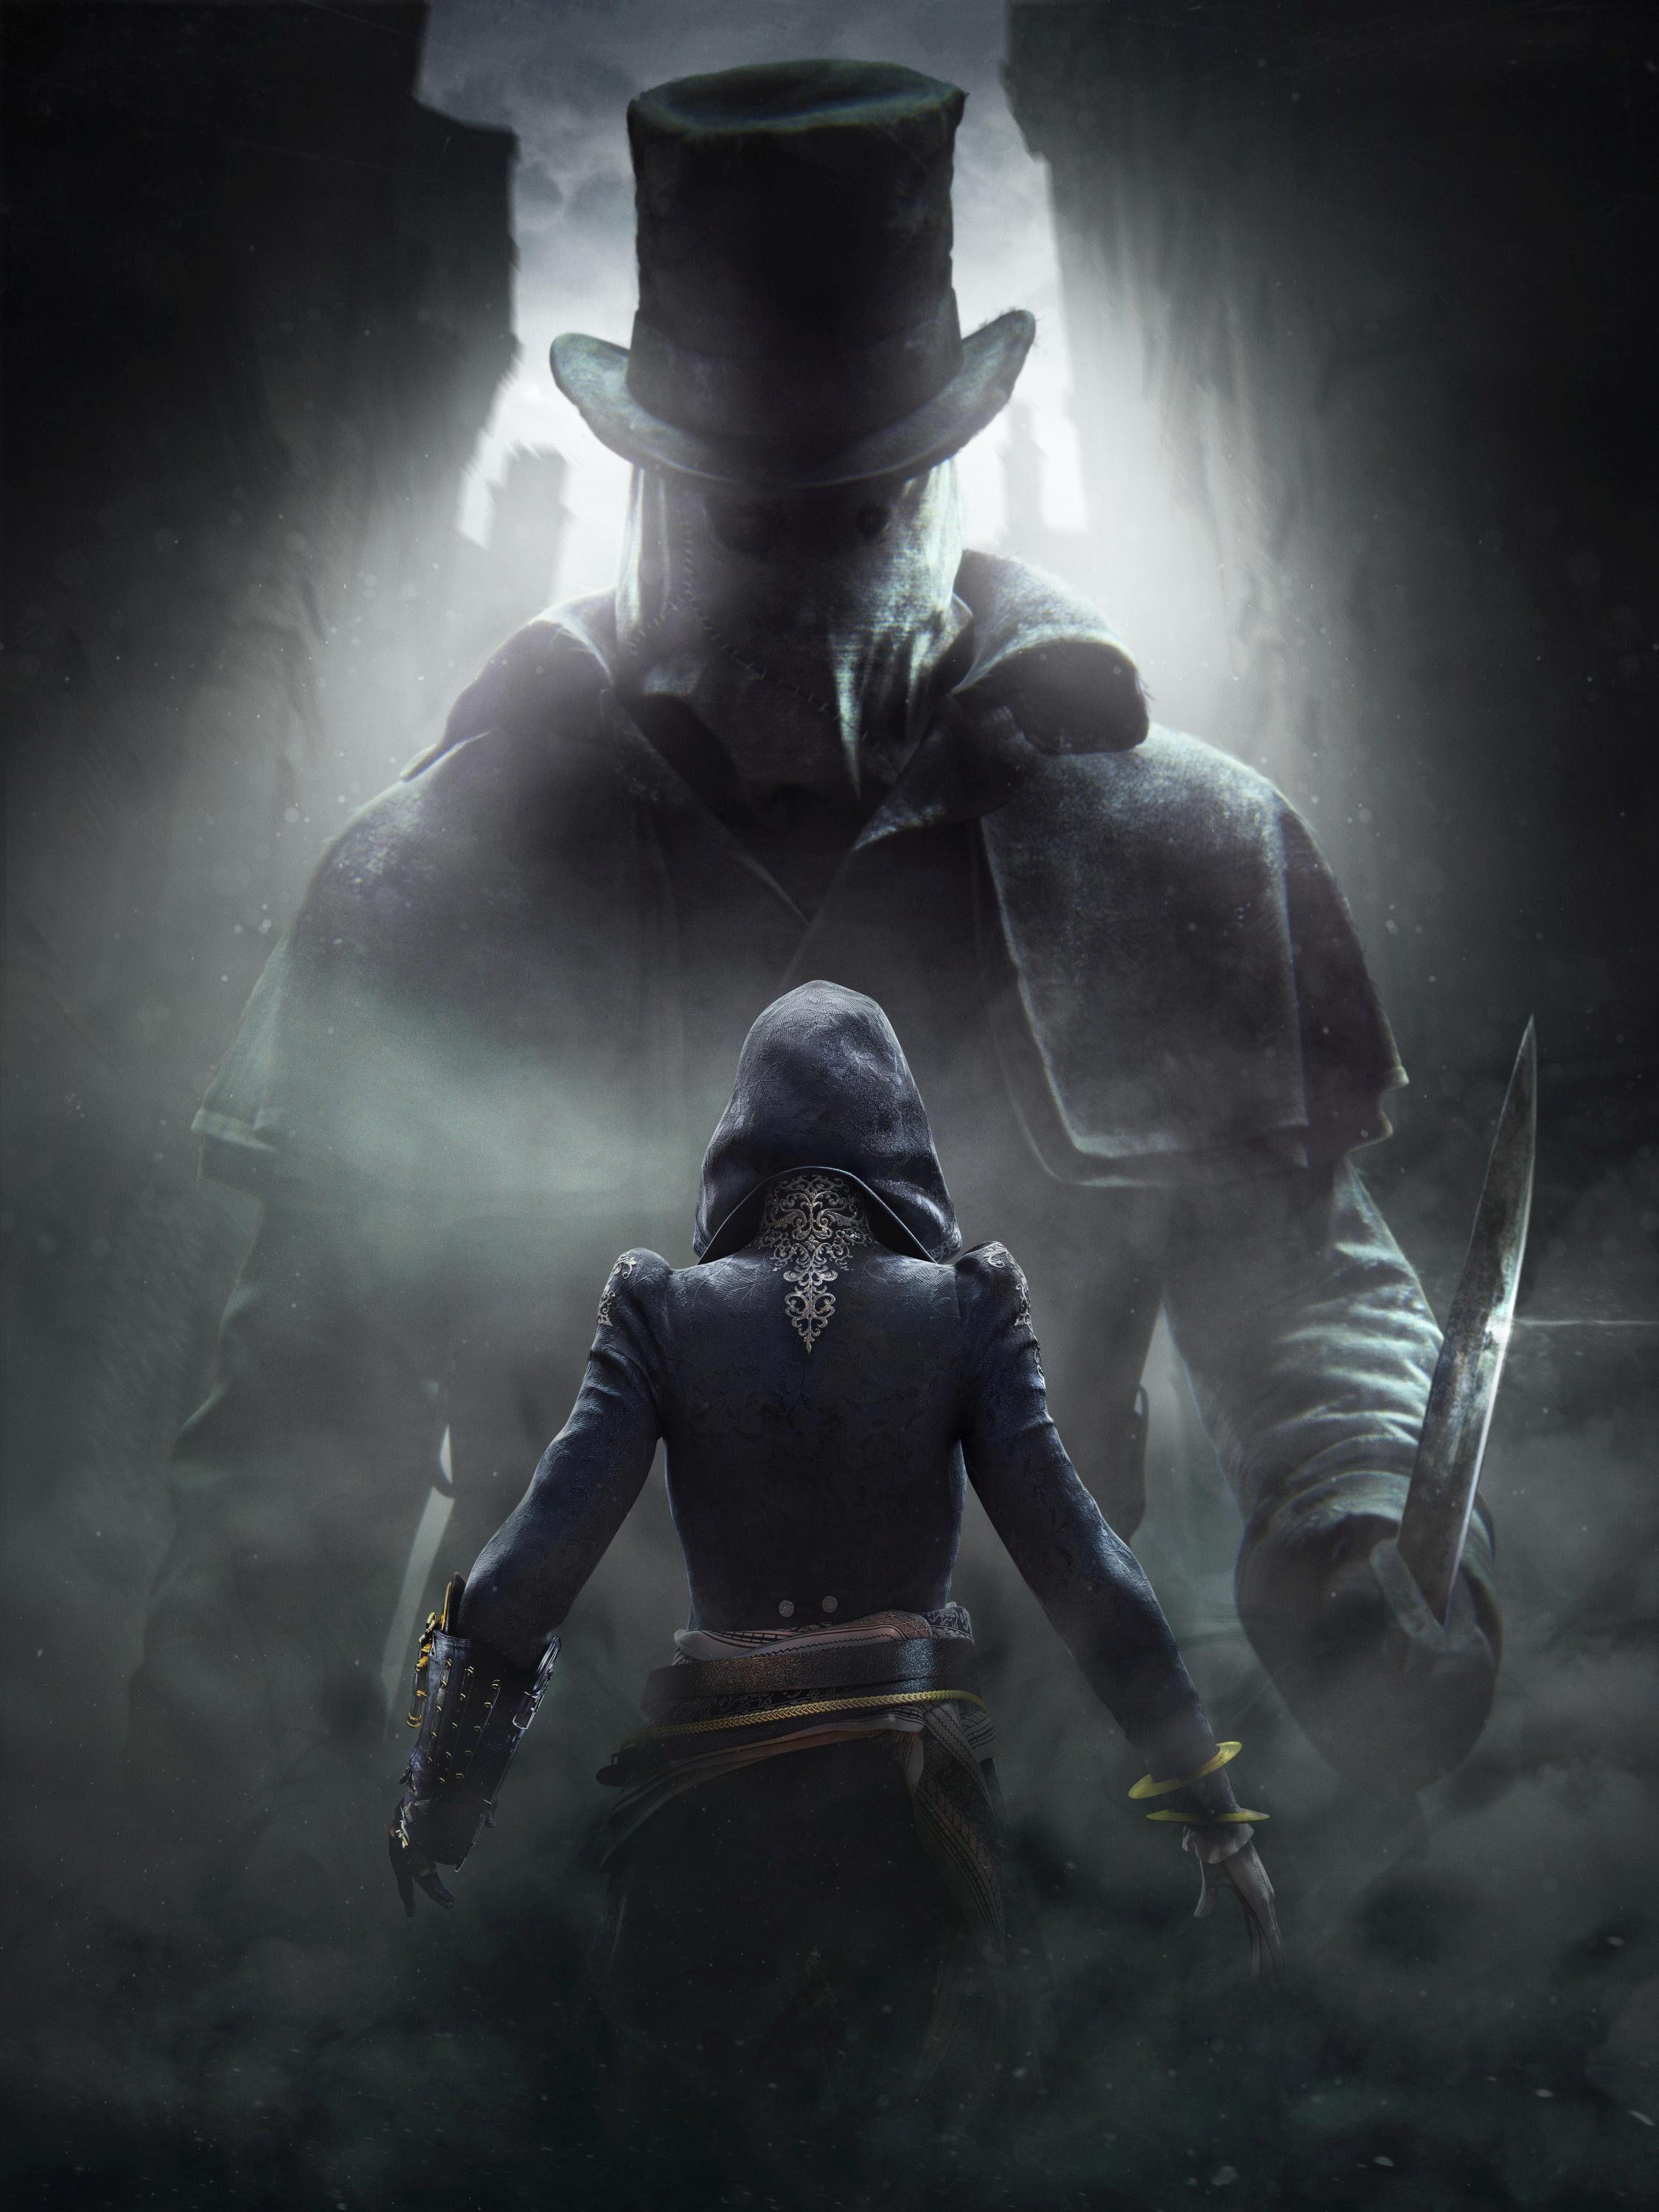 Assassins Creed Jack the Ripper DLC Mobile Wallpaper. Assassins creed, Assassins creed syndicate, Assassins creed artwork